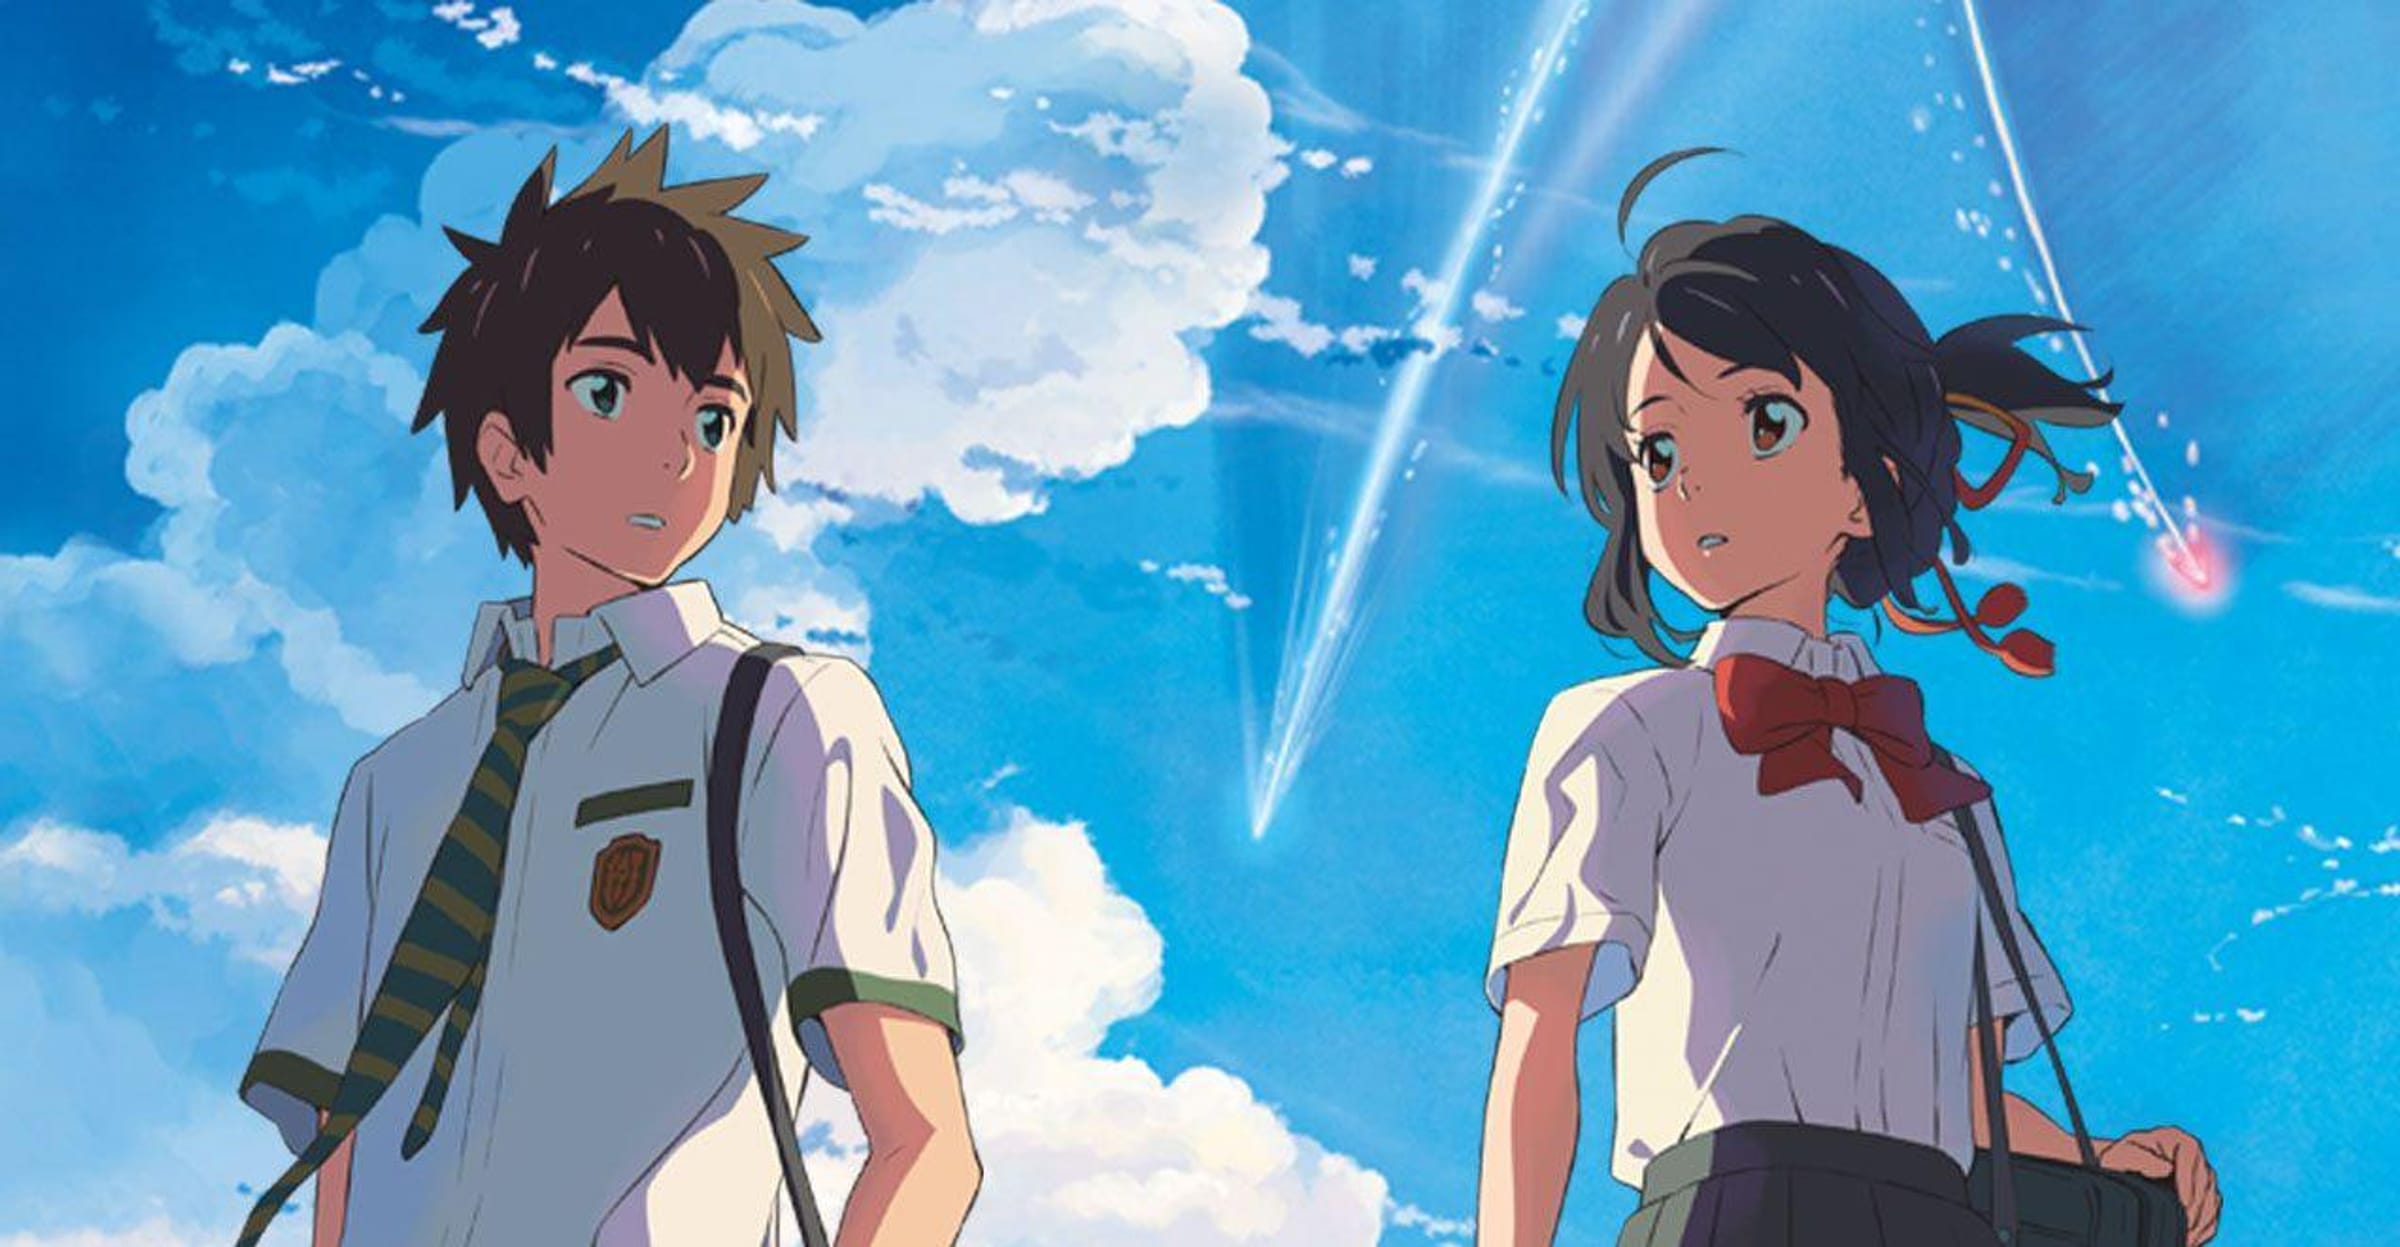 A Body-Switching Teen Romance Anime Disaster Flick With 'Your Name.' On It  : NPR